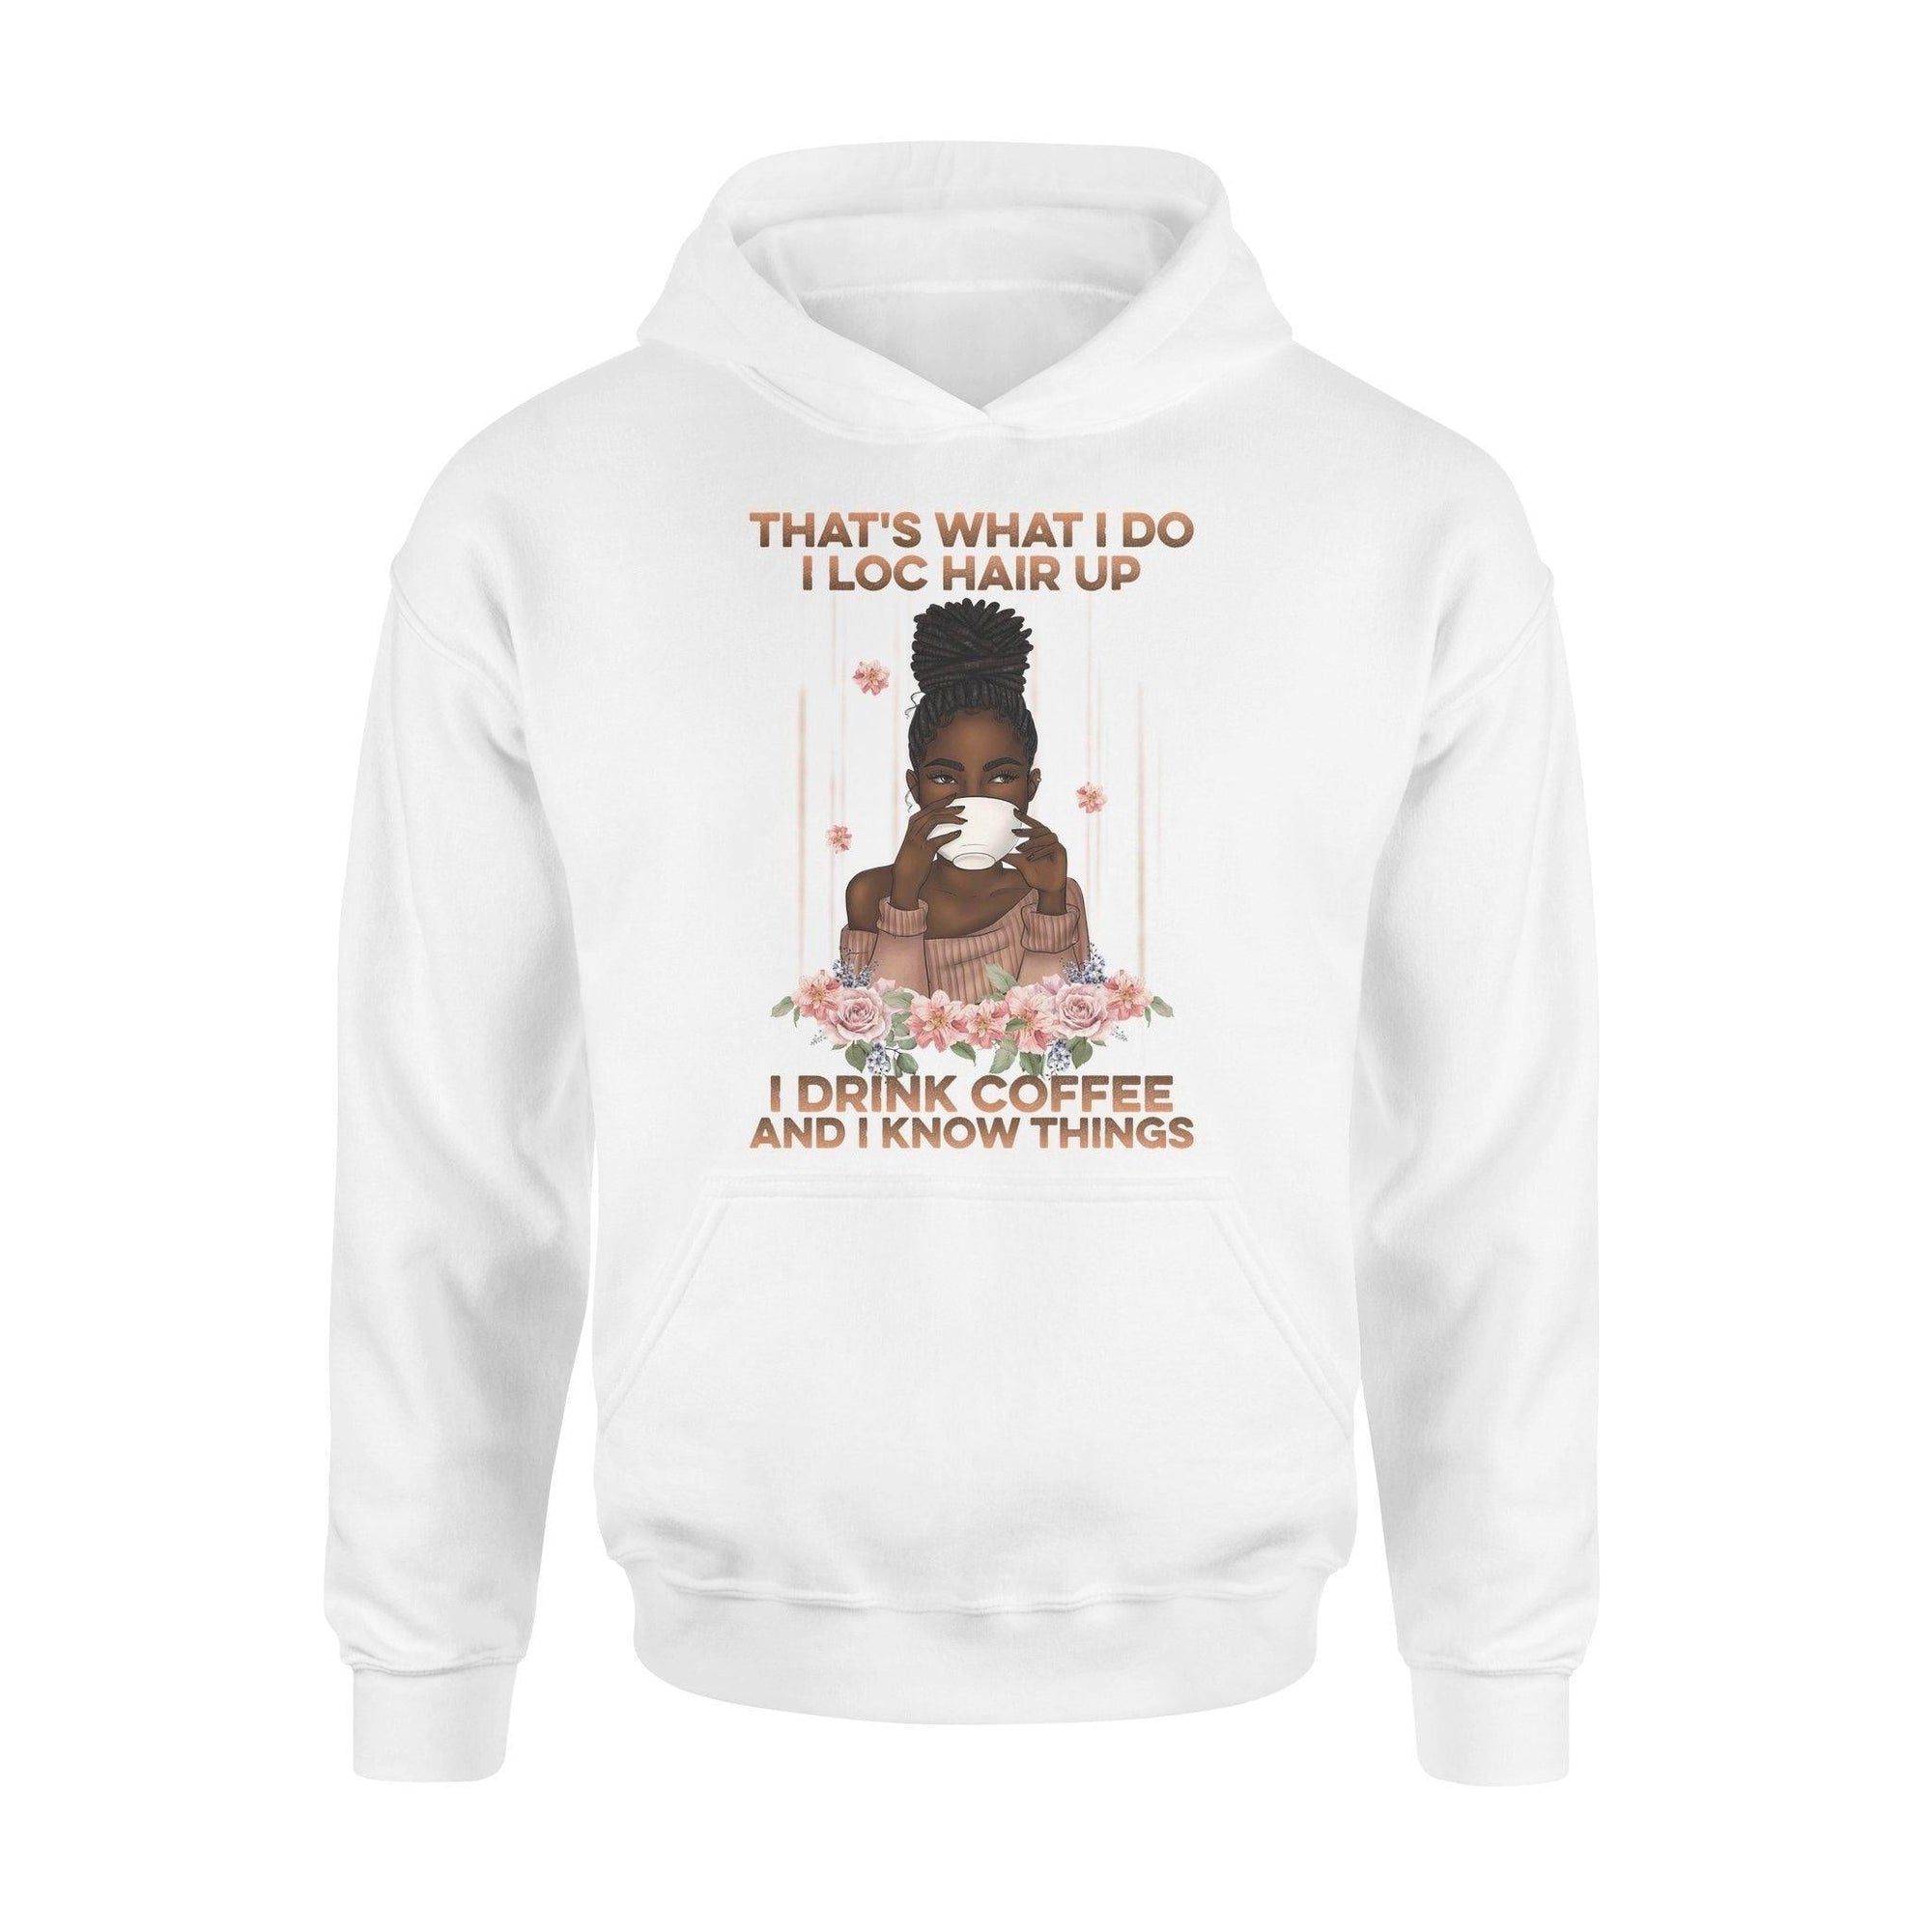 Dreadlock, Coffee That's What I Do - Standard Hoodie - PERSONAL84